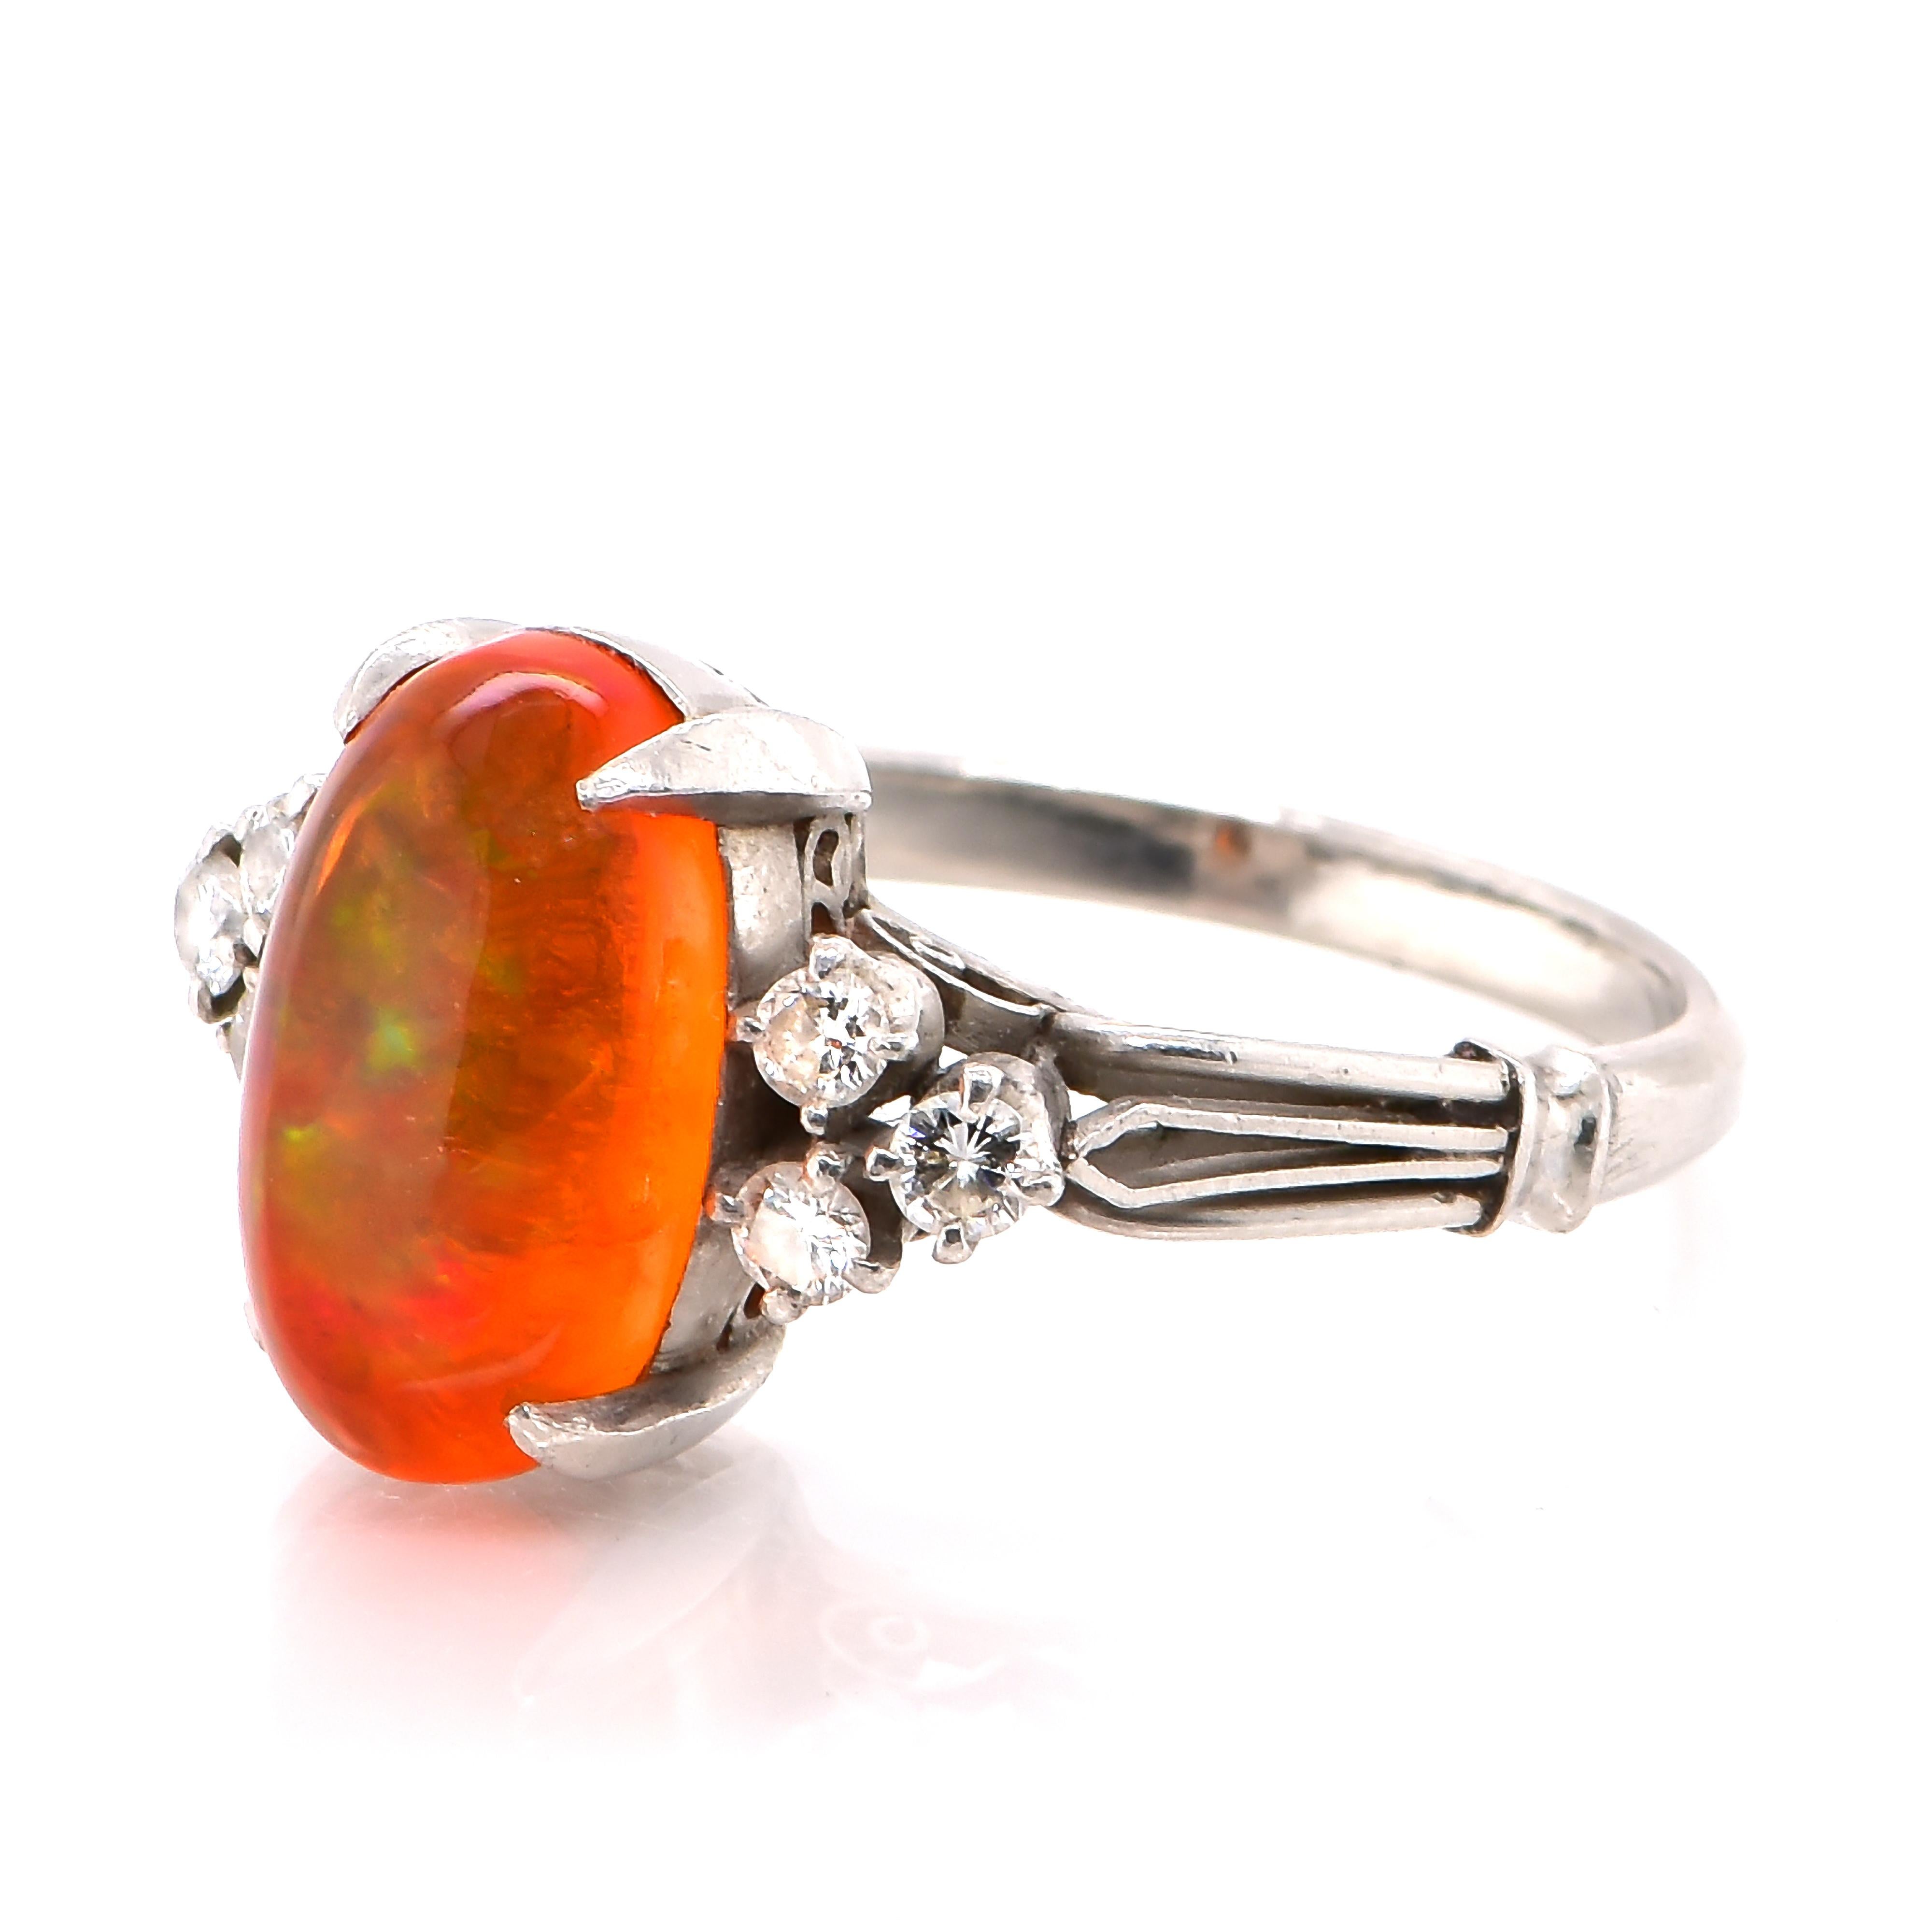 Modern 3.15 Carat Natural Mexican Fire Opal and Diamond Estate Ring Made in Platinum For Sale